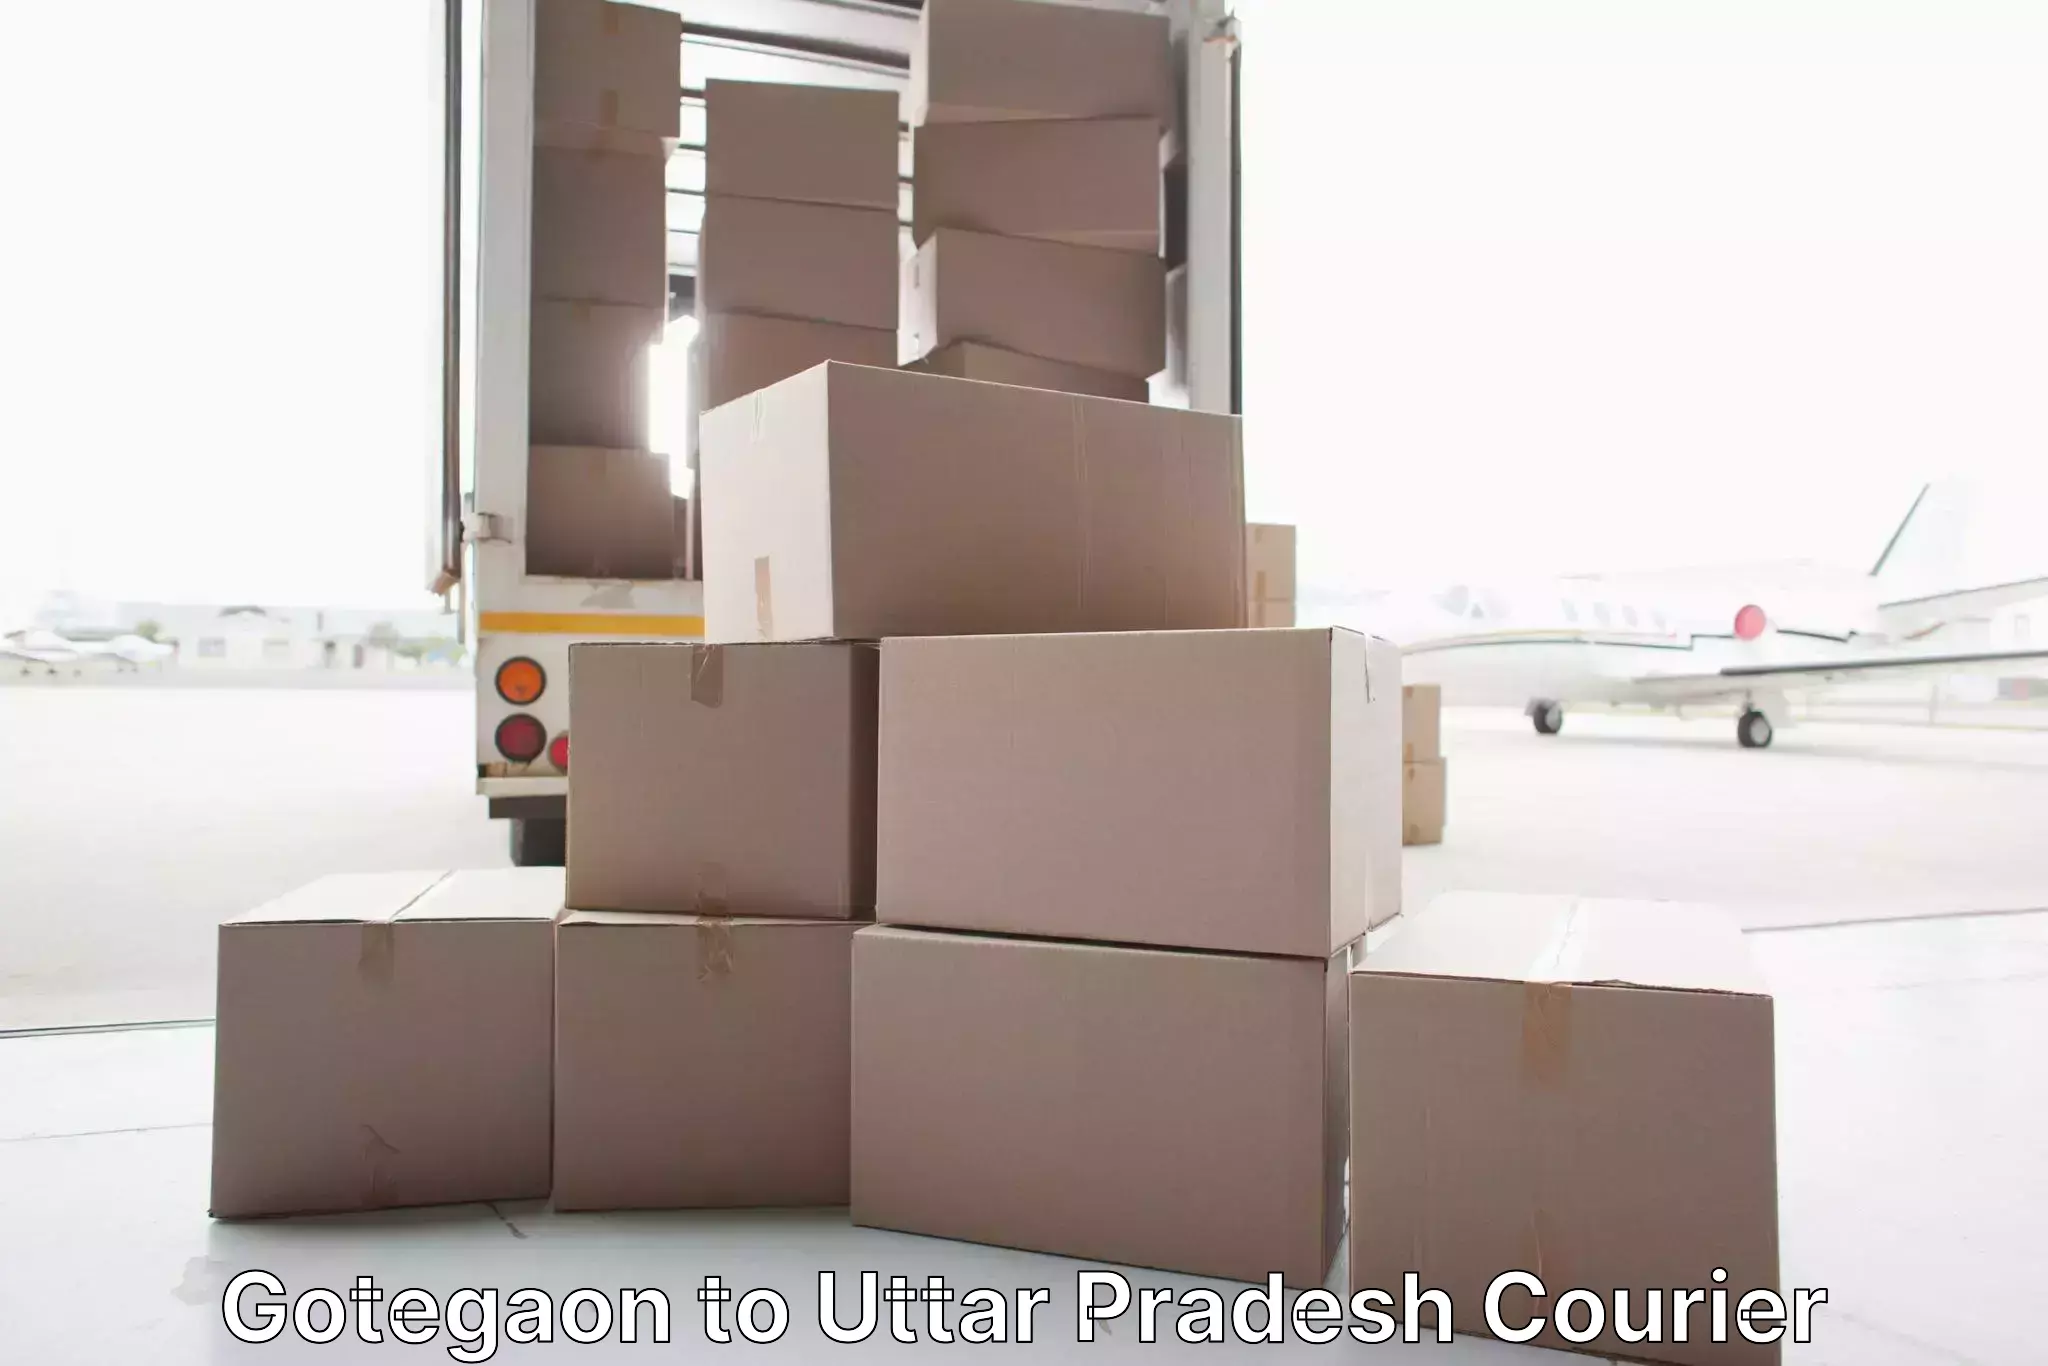 Full-service movers Gotegaon to Deoband